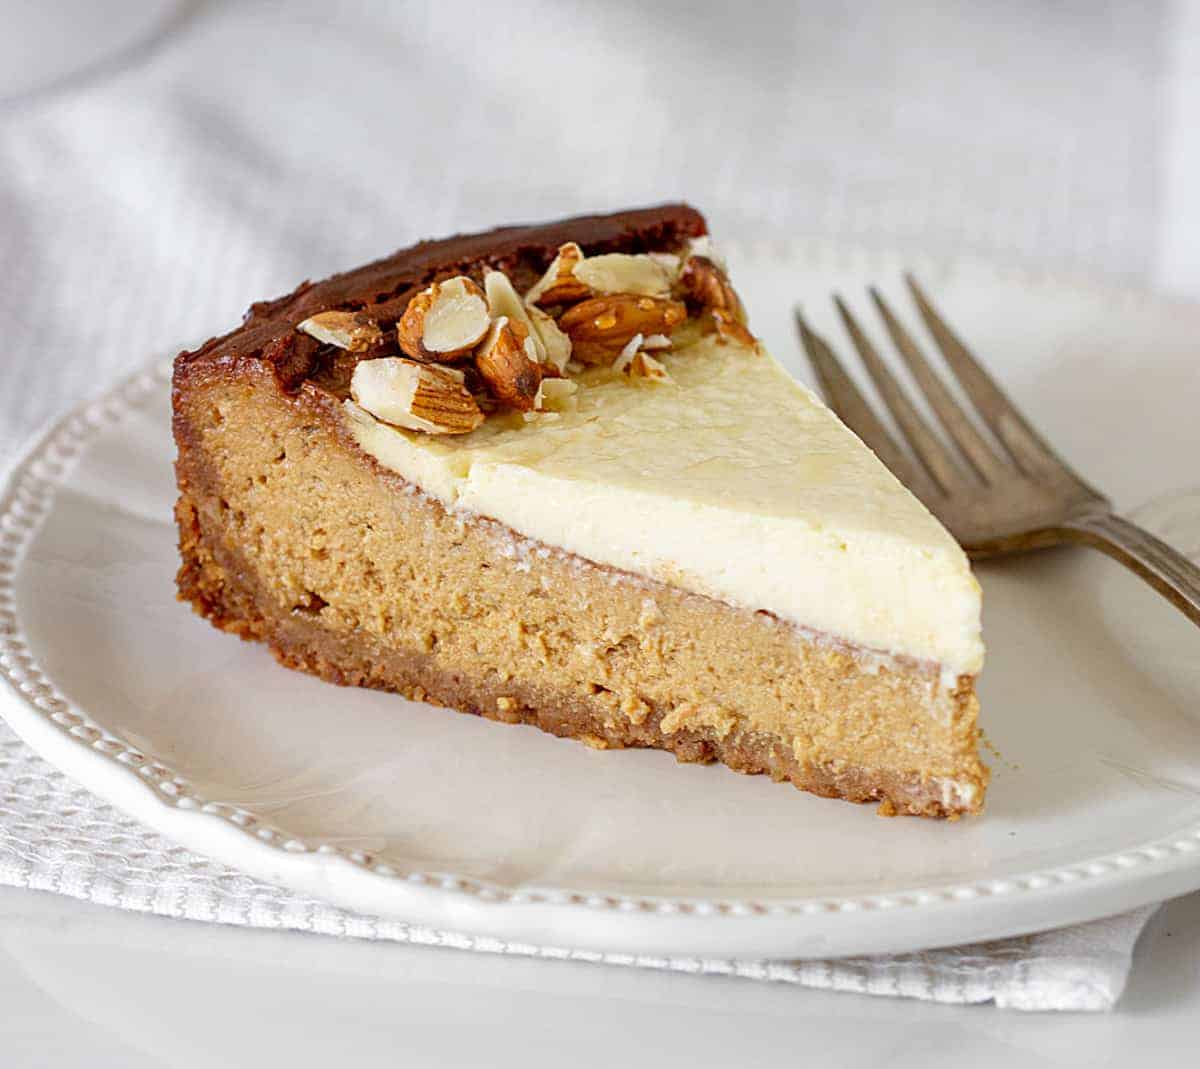 Slice of Brown Sugar Cheesecake on white plate and surface, a silver fork besides